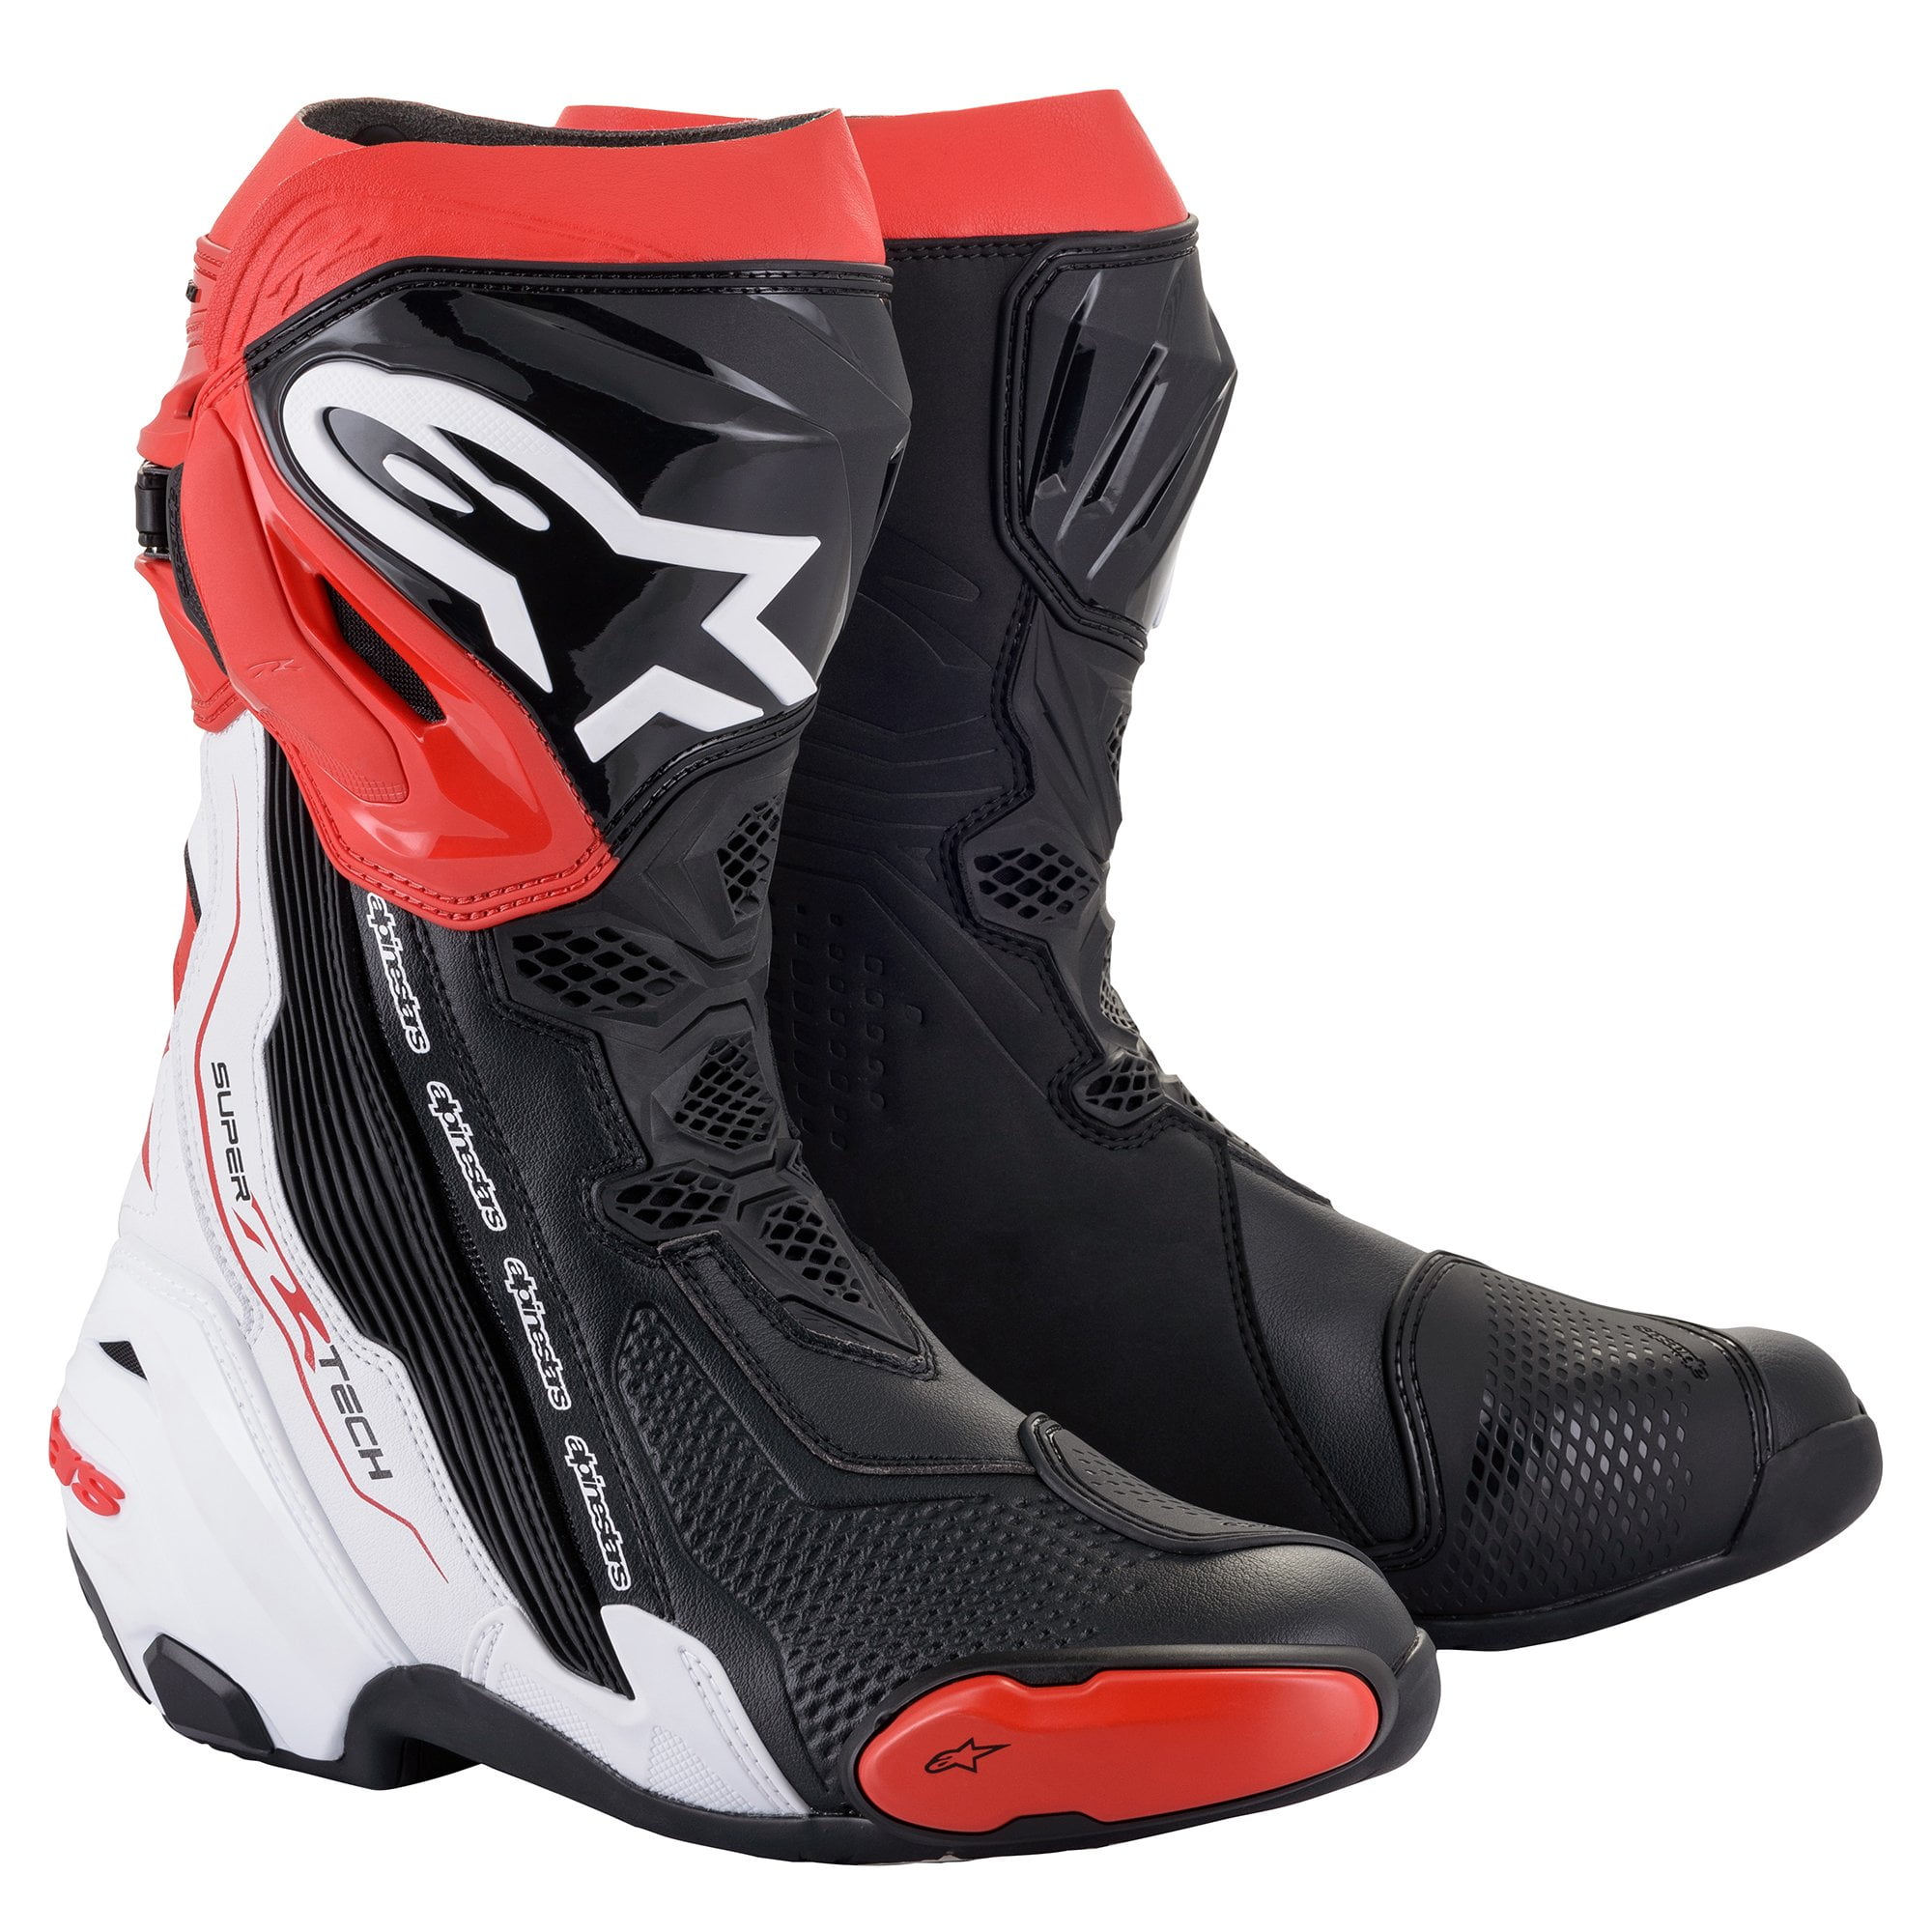 custom flag name decals designed to fit alpinestars supertech boots